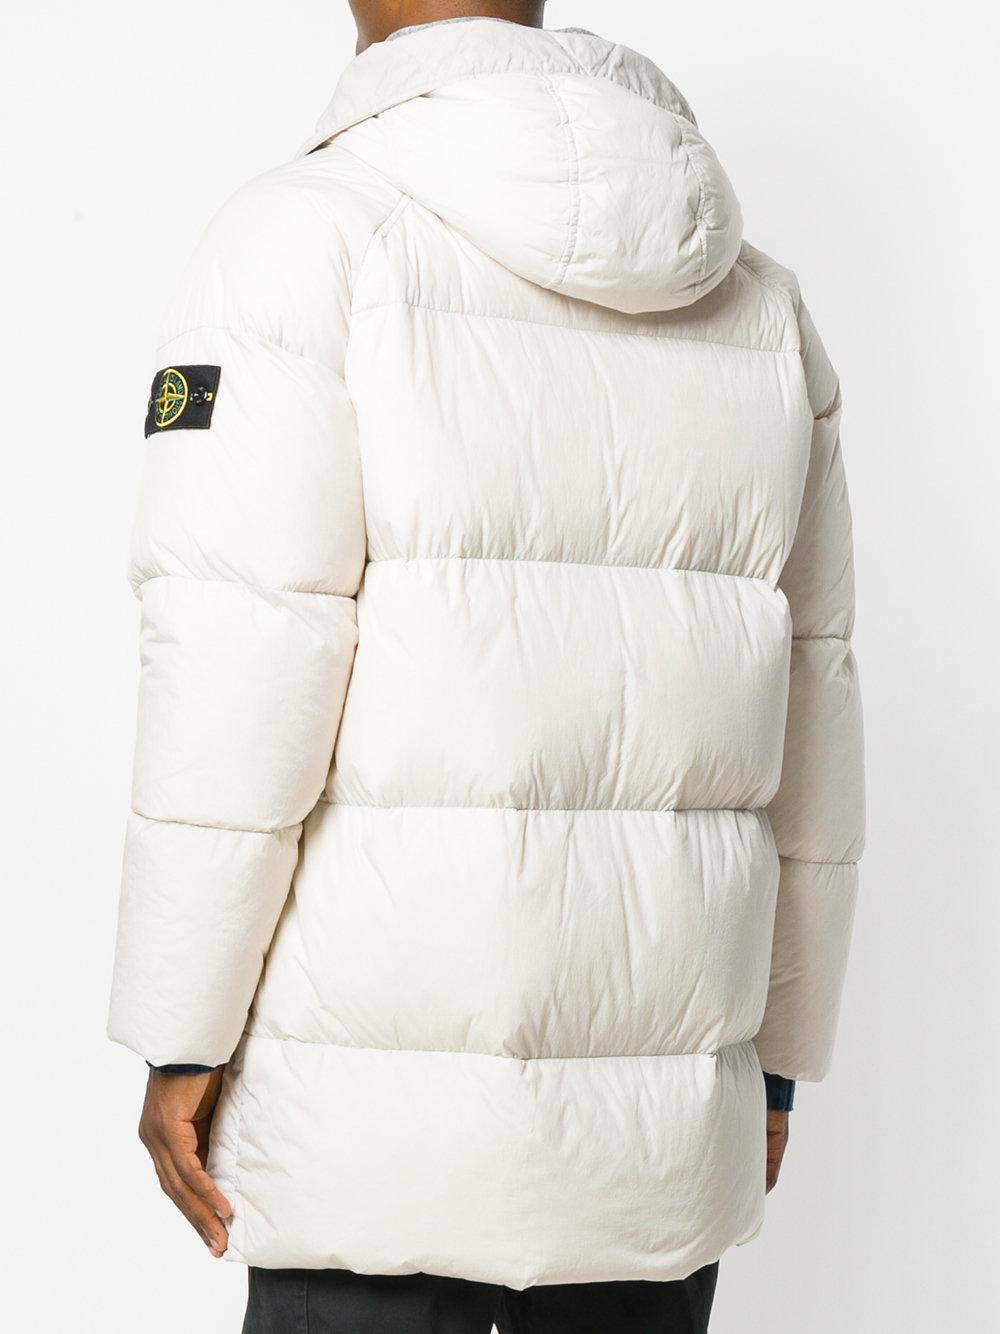 Stone Island Synthetic Hooded Puffer Coat in White for Men - Lyst